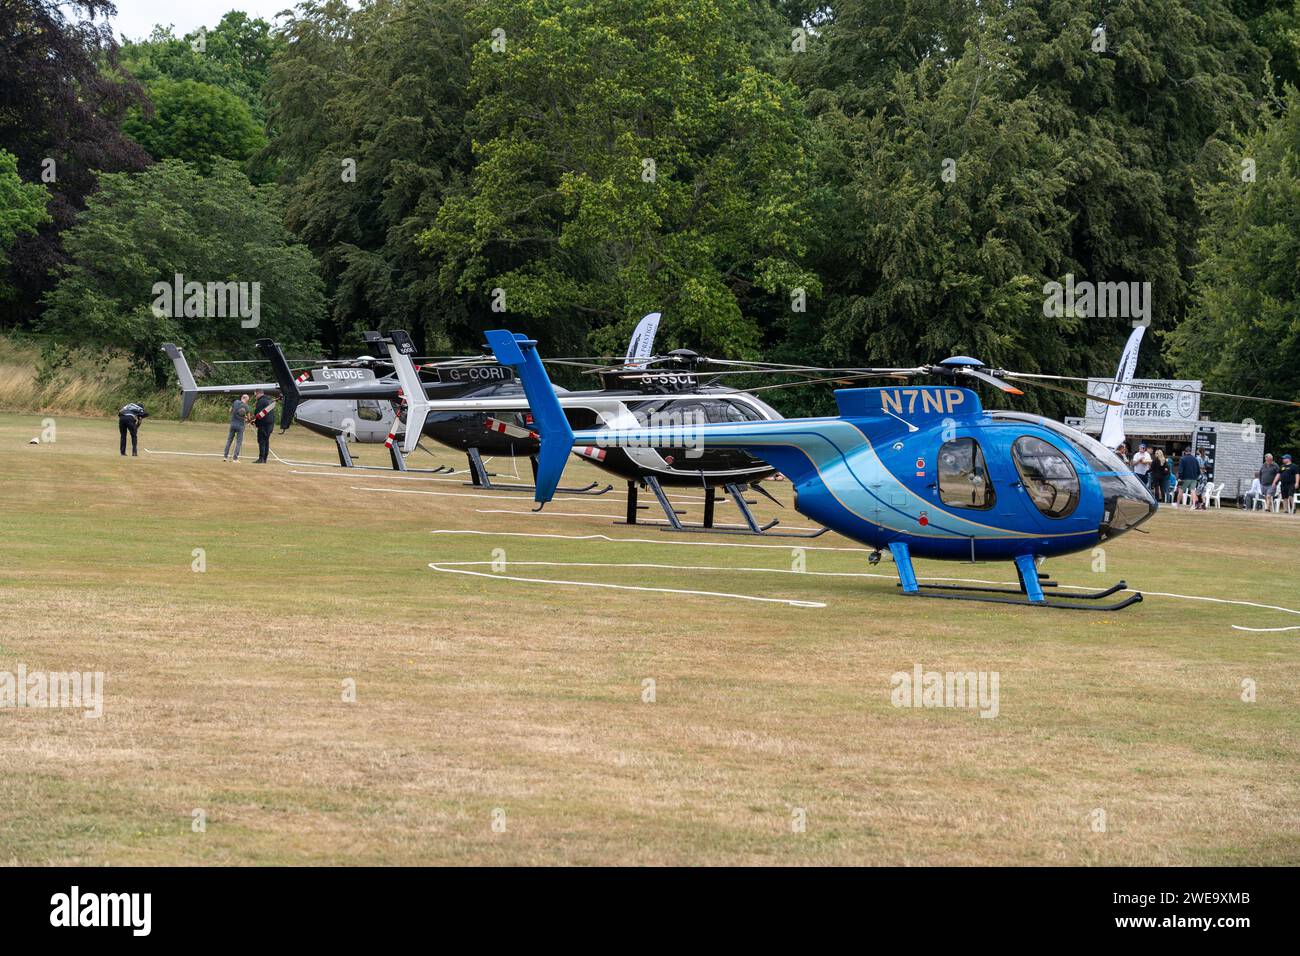 4 Helicopters Parked in a Row Stock Photo